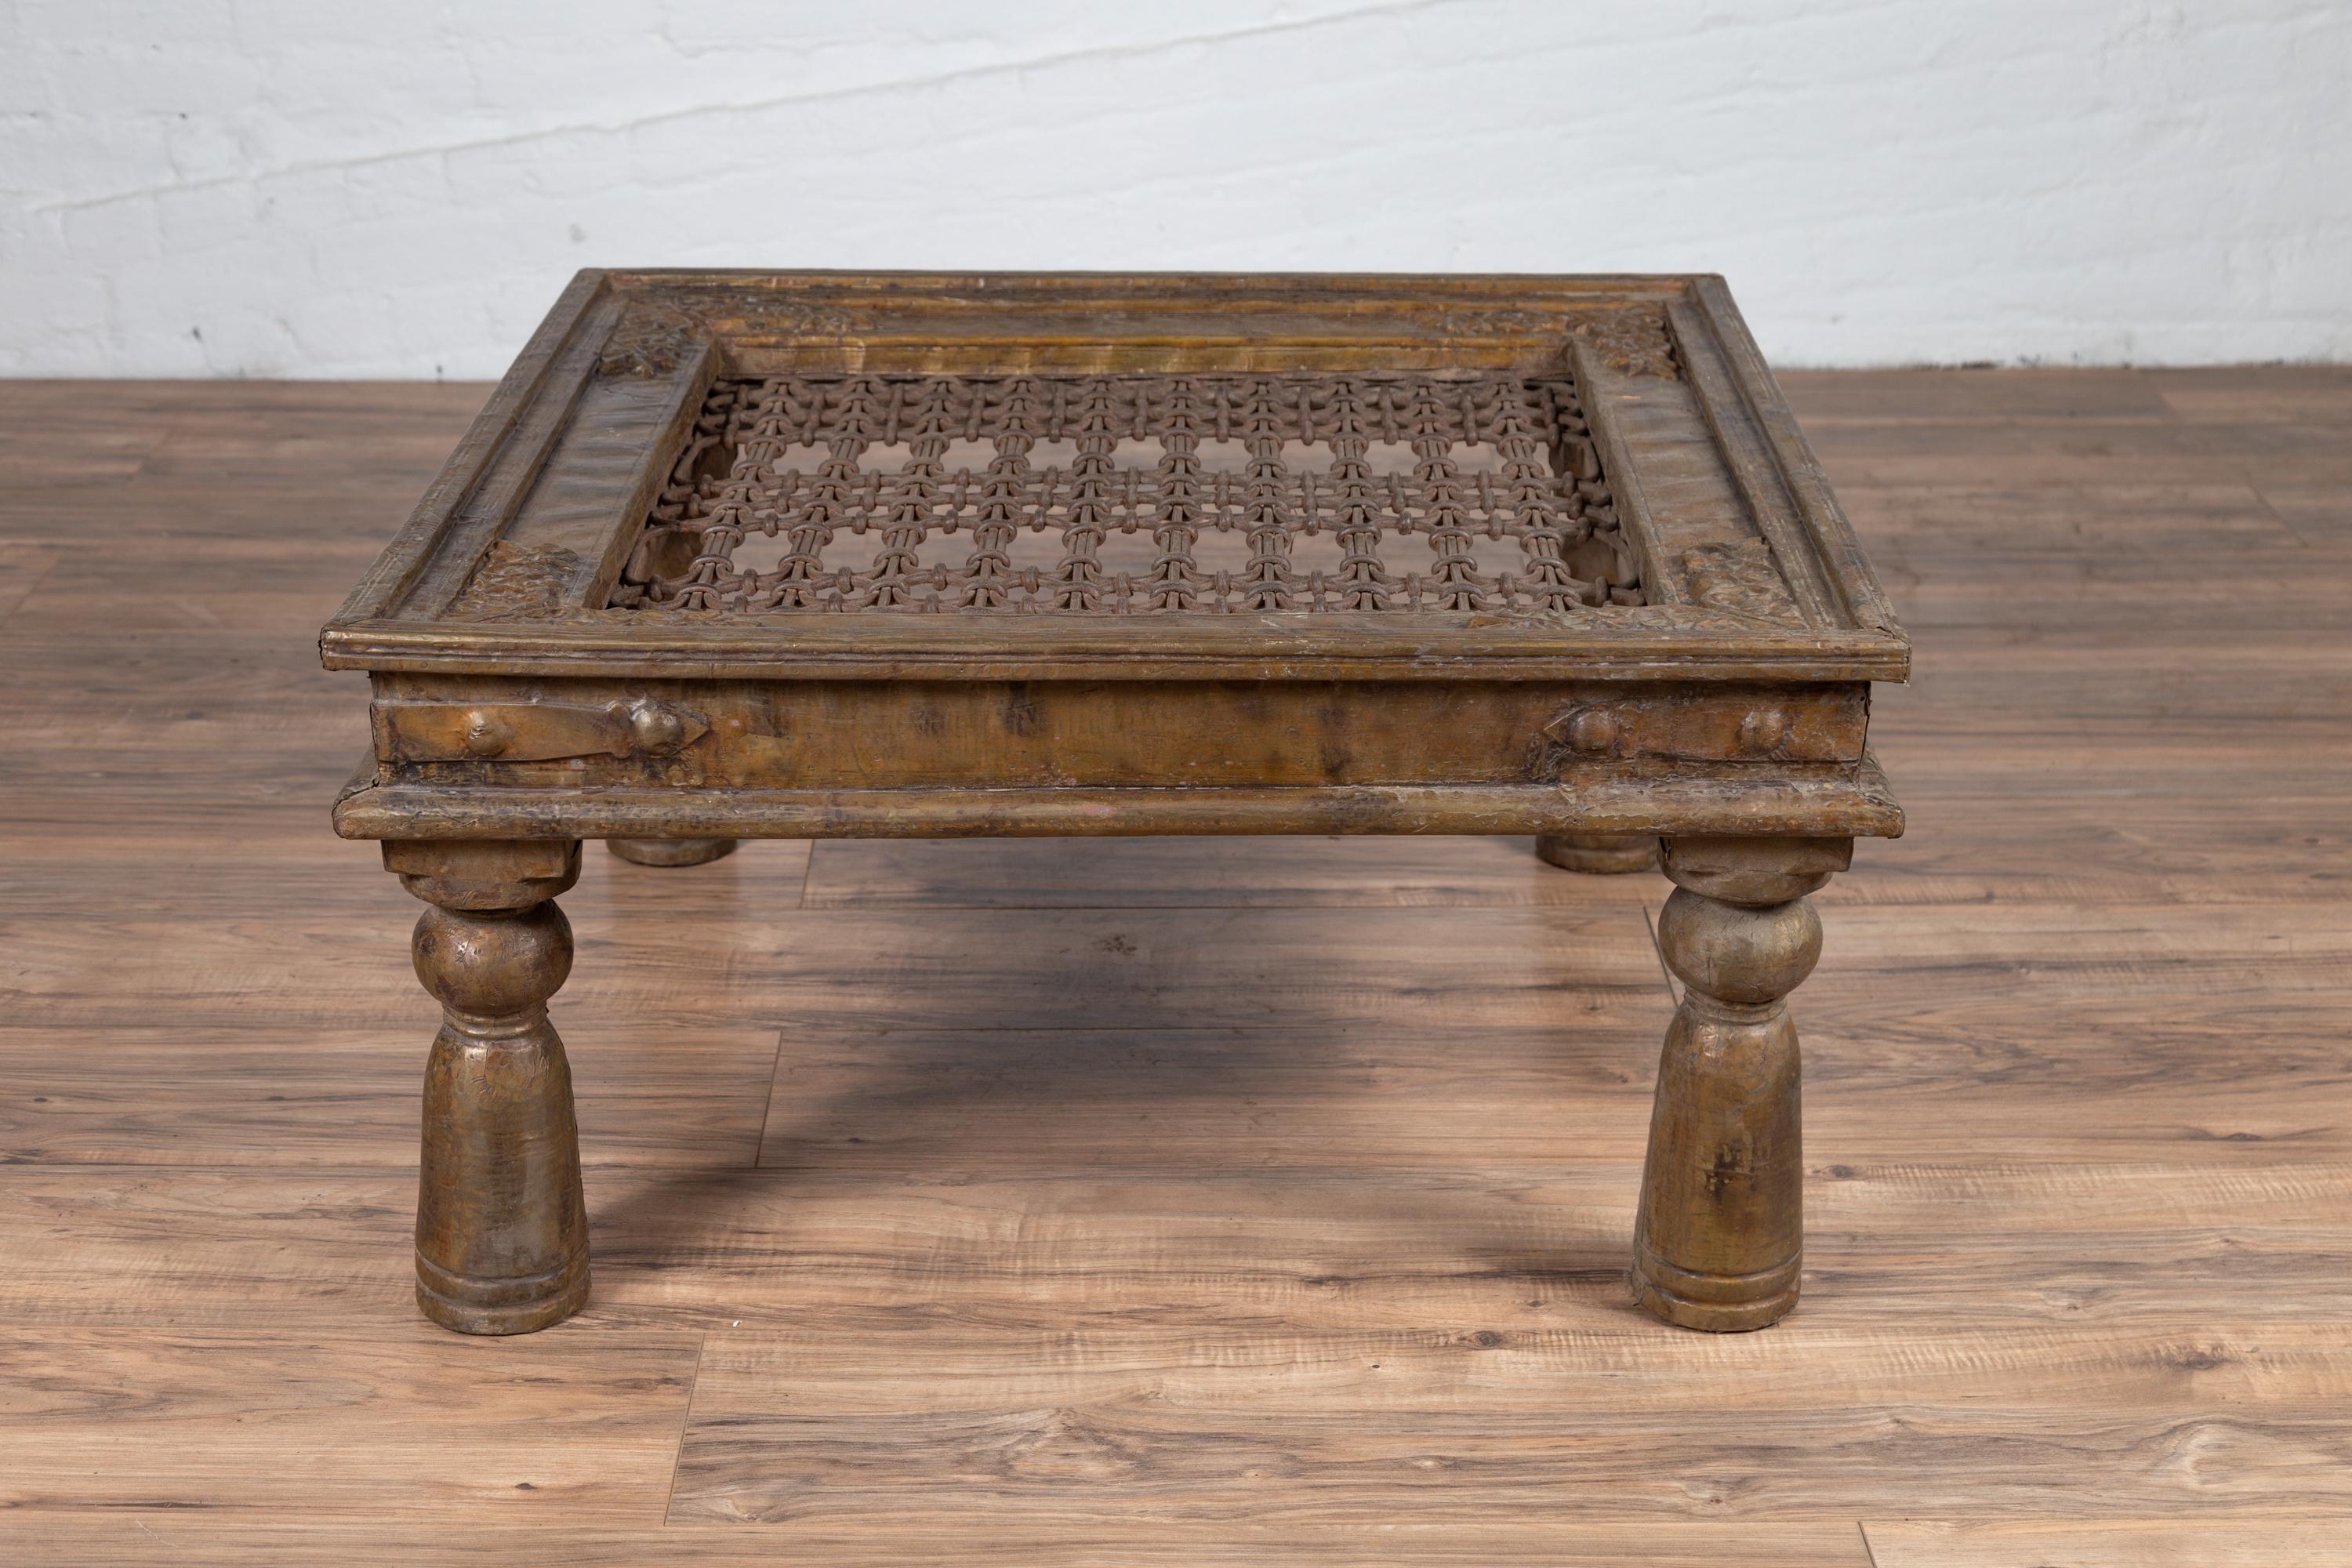 Antique Indian Brass Window Grate Coffee Table with Iron Geometric Design For Sale 5